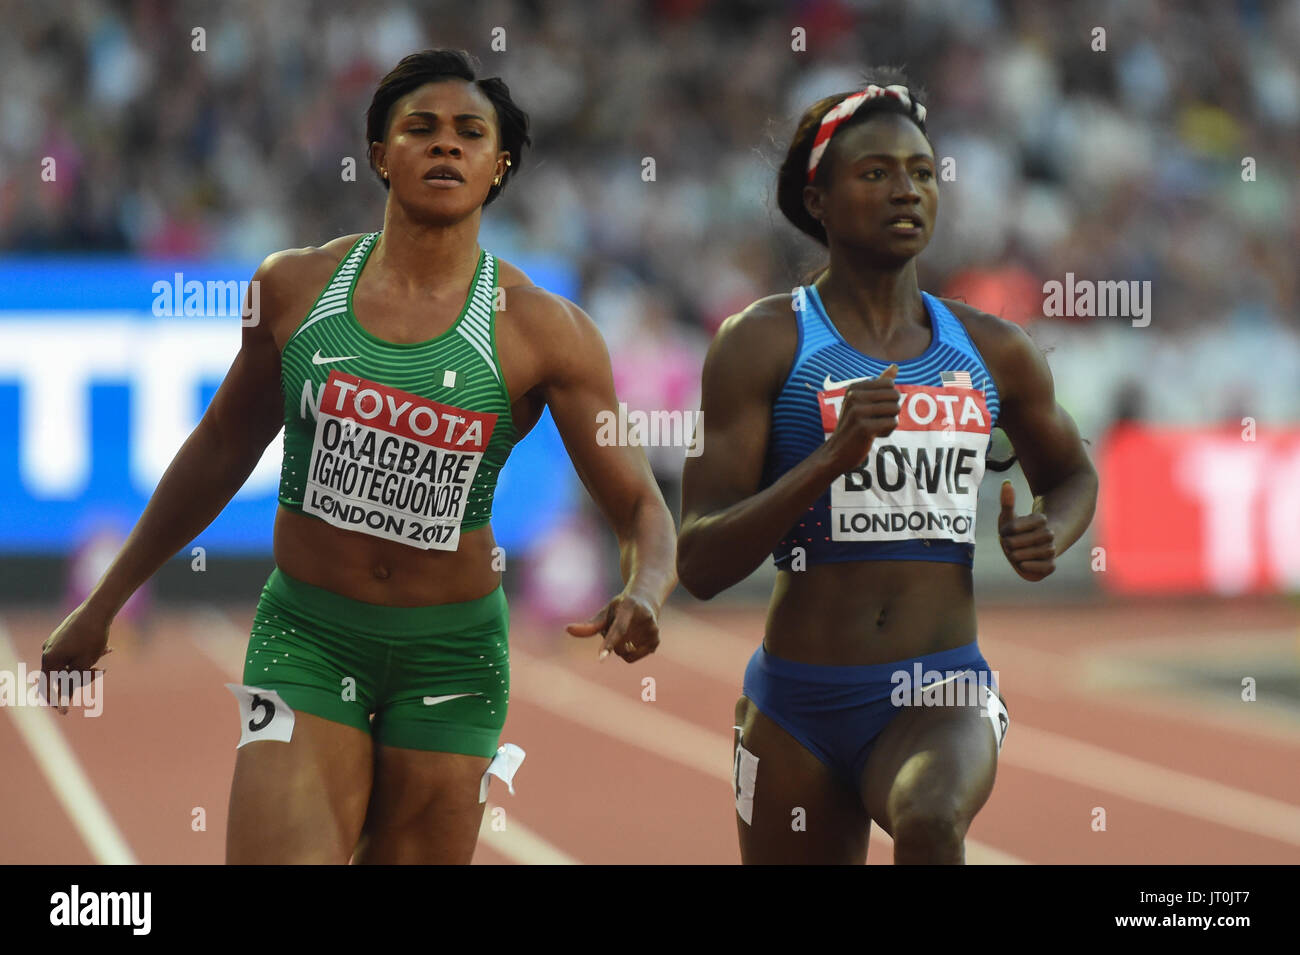 London, UK. 6th Aug, 2017. Blessing OKAGBARE-IGHOTEGUONOR, Nigeria, and Tori BOWIE, USA; during 100 meter semifinal in London on August 6, 2017 at the 2017 IAAF World Championships athletics. Credit: Ulrik Pedersen/Alamy Live News Stock Photo